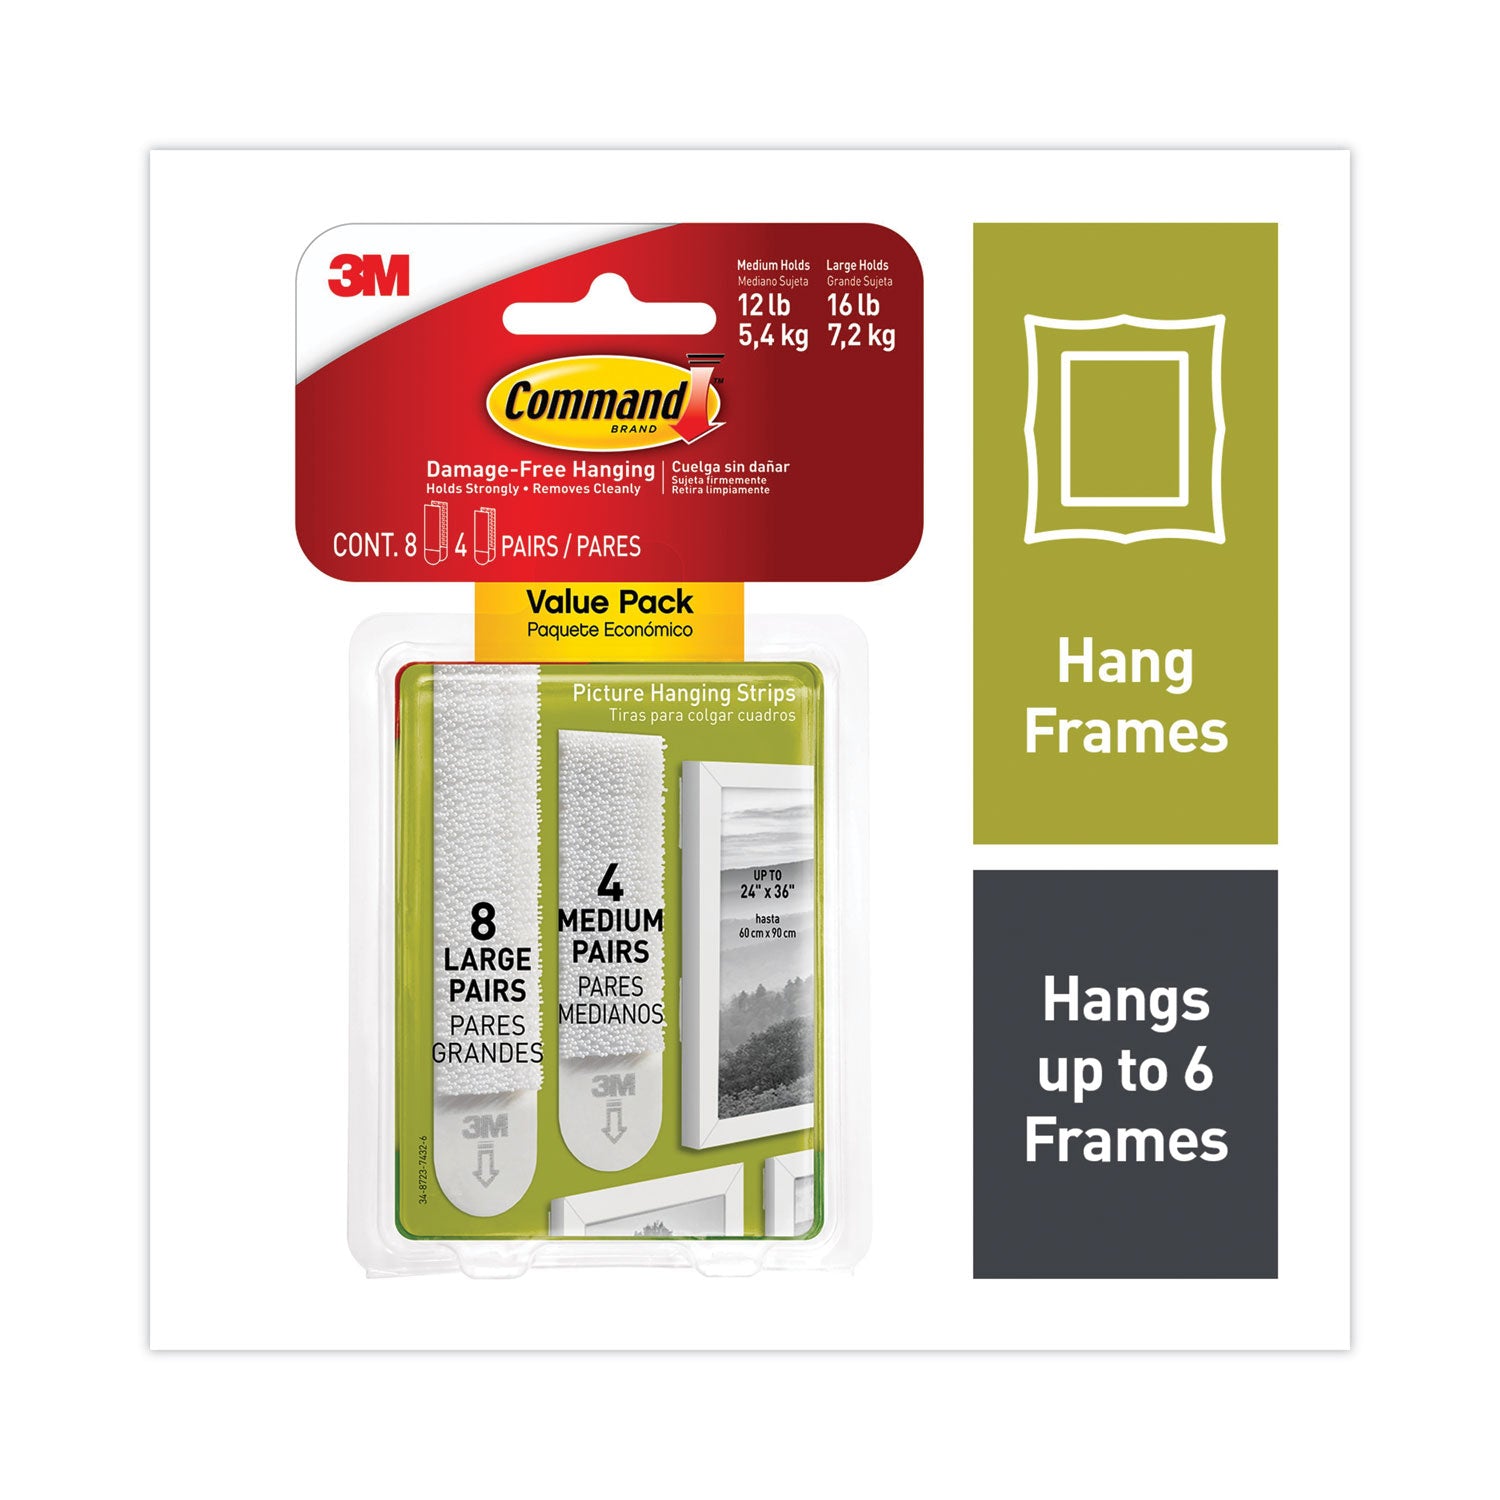 picture-hanging-strips-value-pack-removable-8-large-063-x-363-pairs-4-medium-05-x-275-pairs-white_mmm17209es - 2